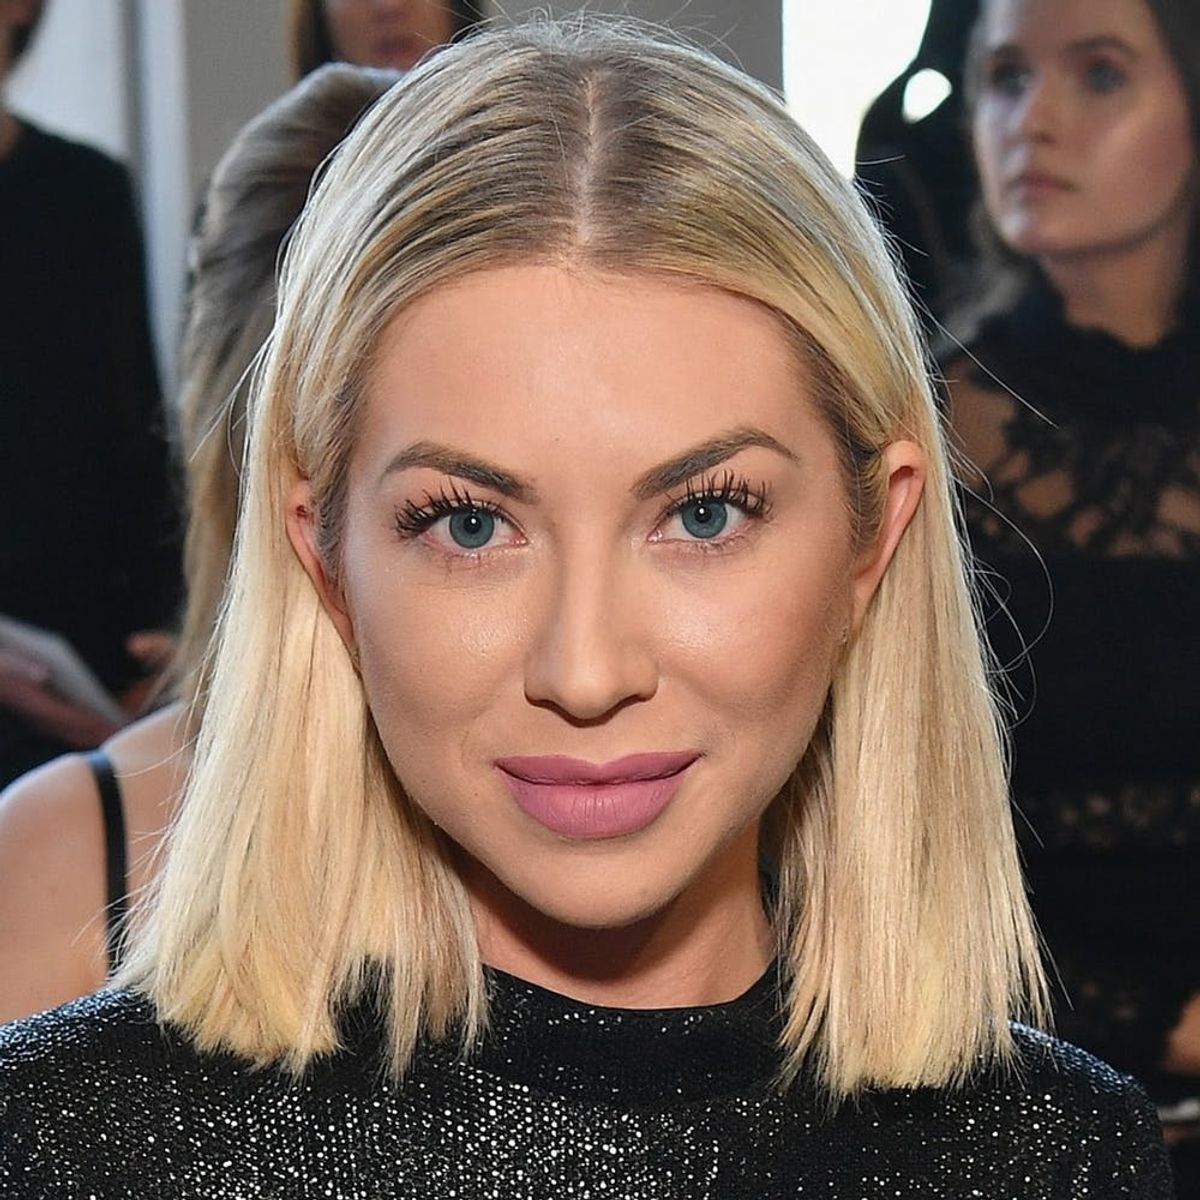 Stassi Schroeder Posted a Makeup-Free Vid to Support Fans With Psoriasis